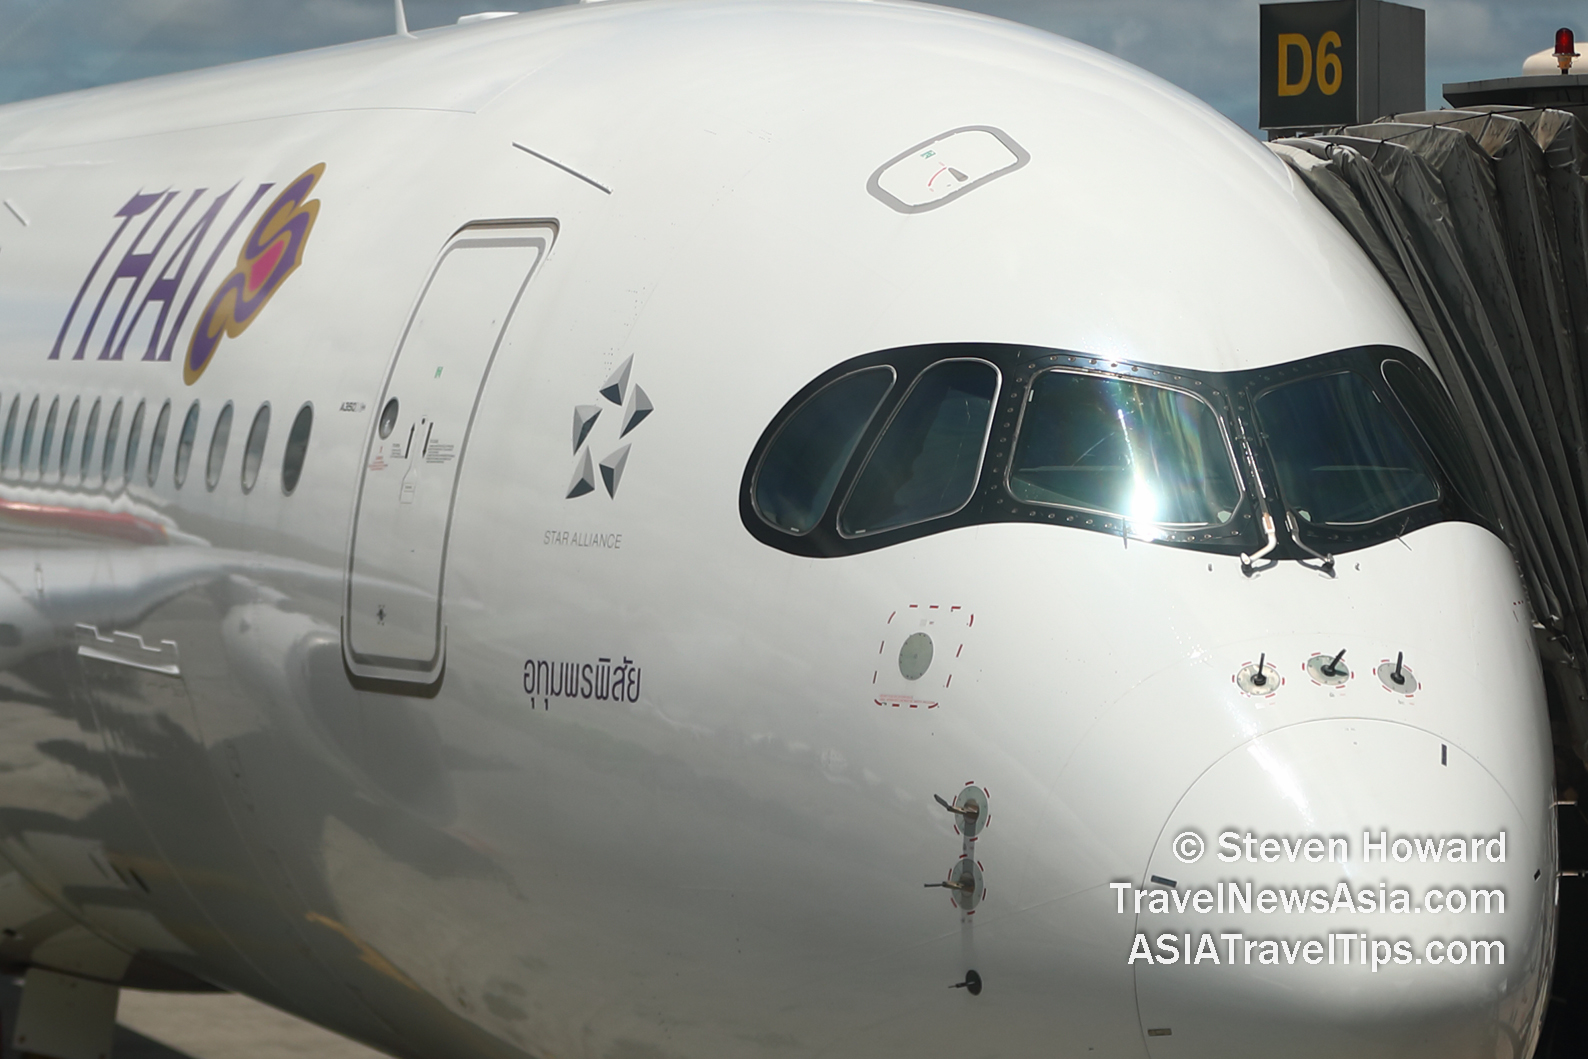 Thai Airways Airbus A350-900. Picture by Steven Howard of TravelNewsAsia.com Click to enlarge.